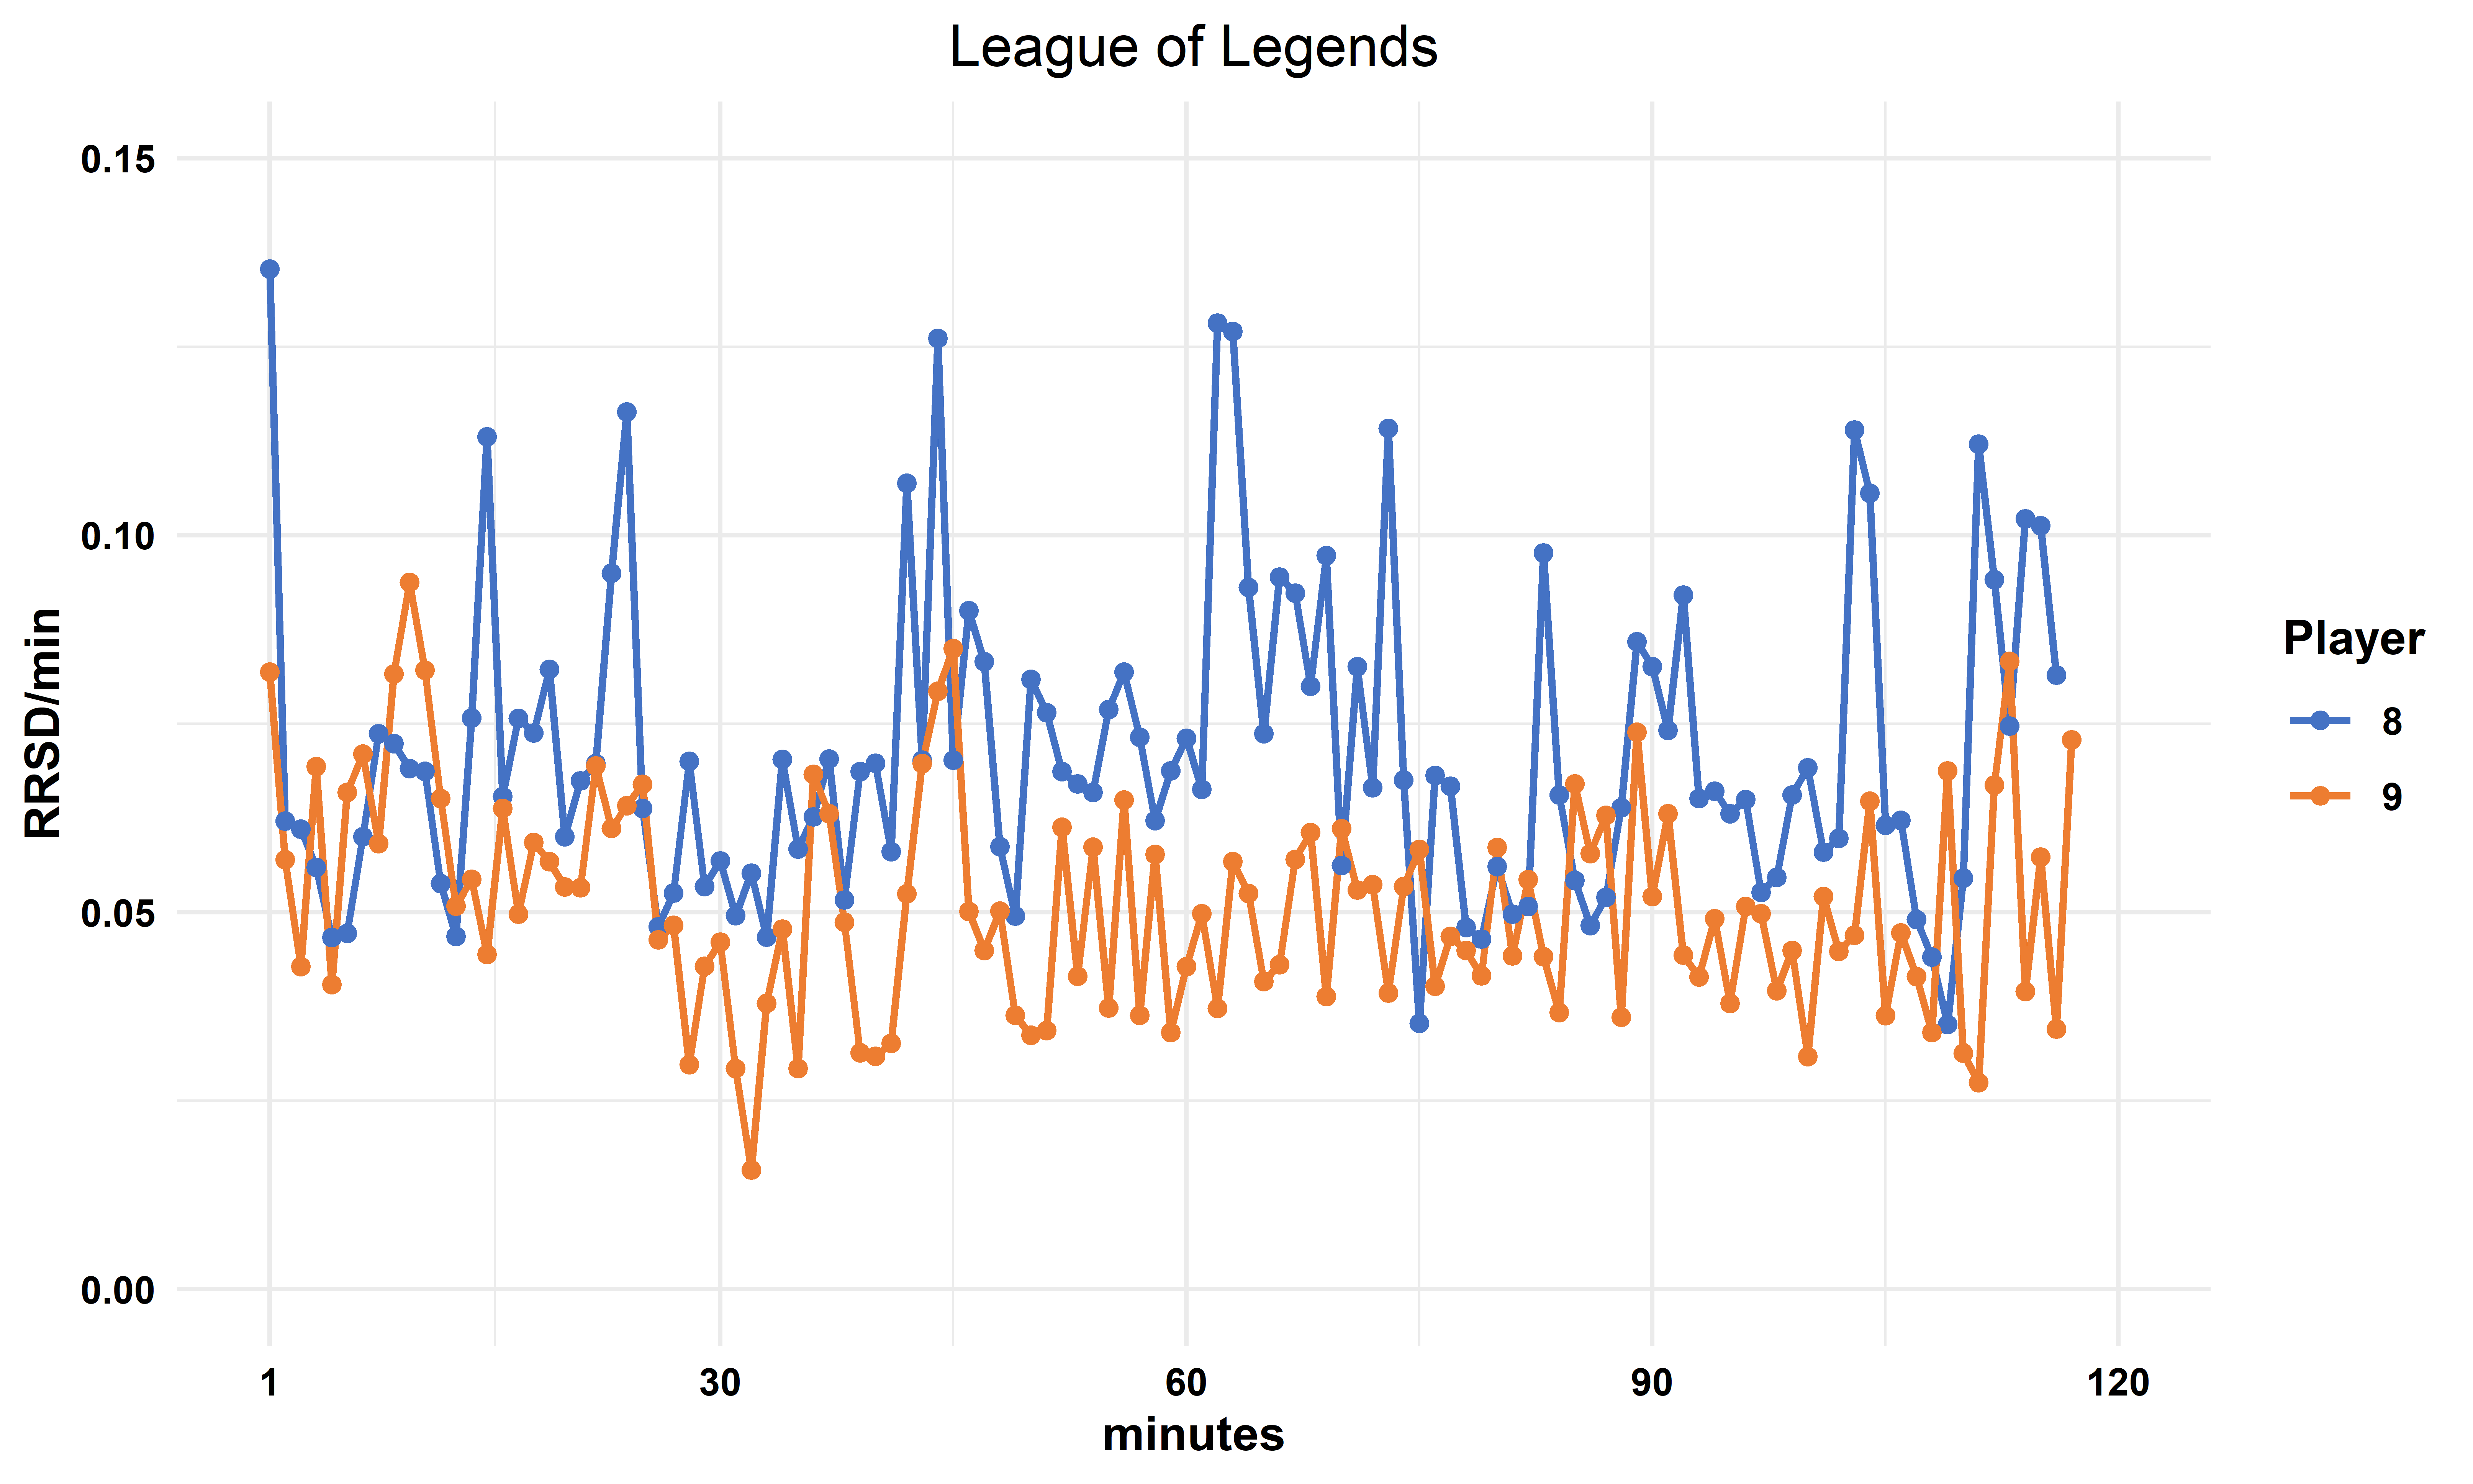 Intrateam variability across multiple game titles.